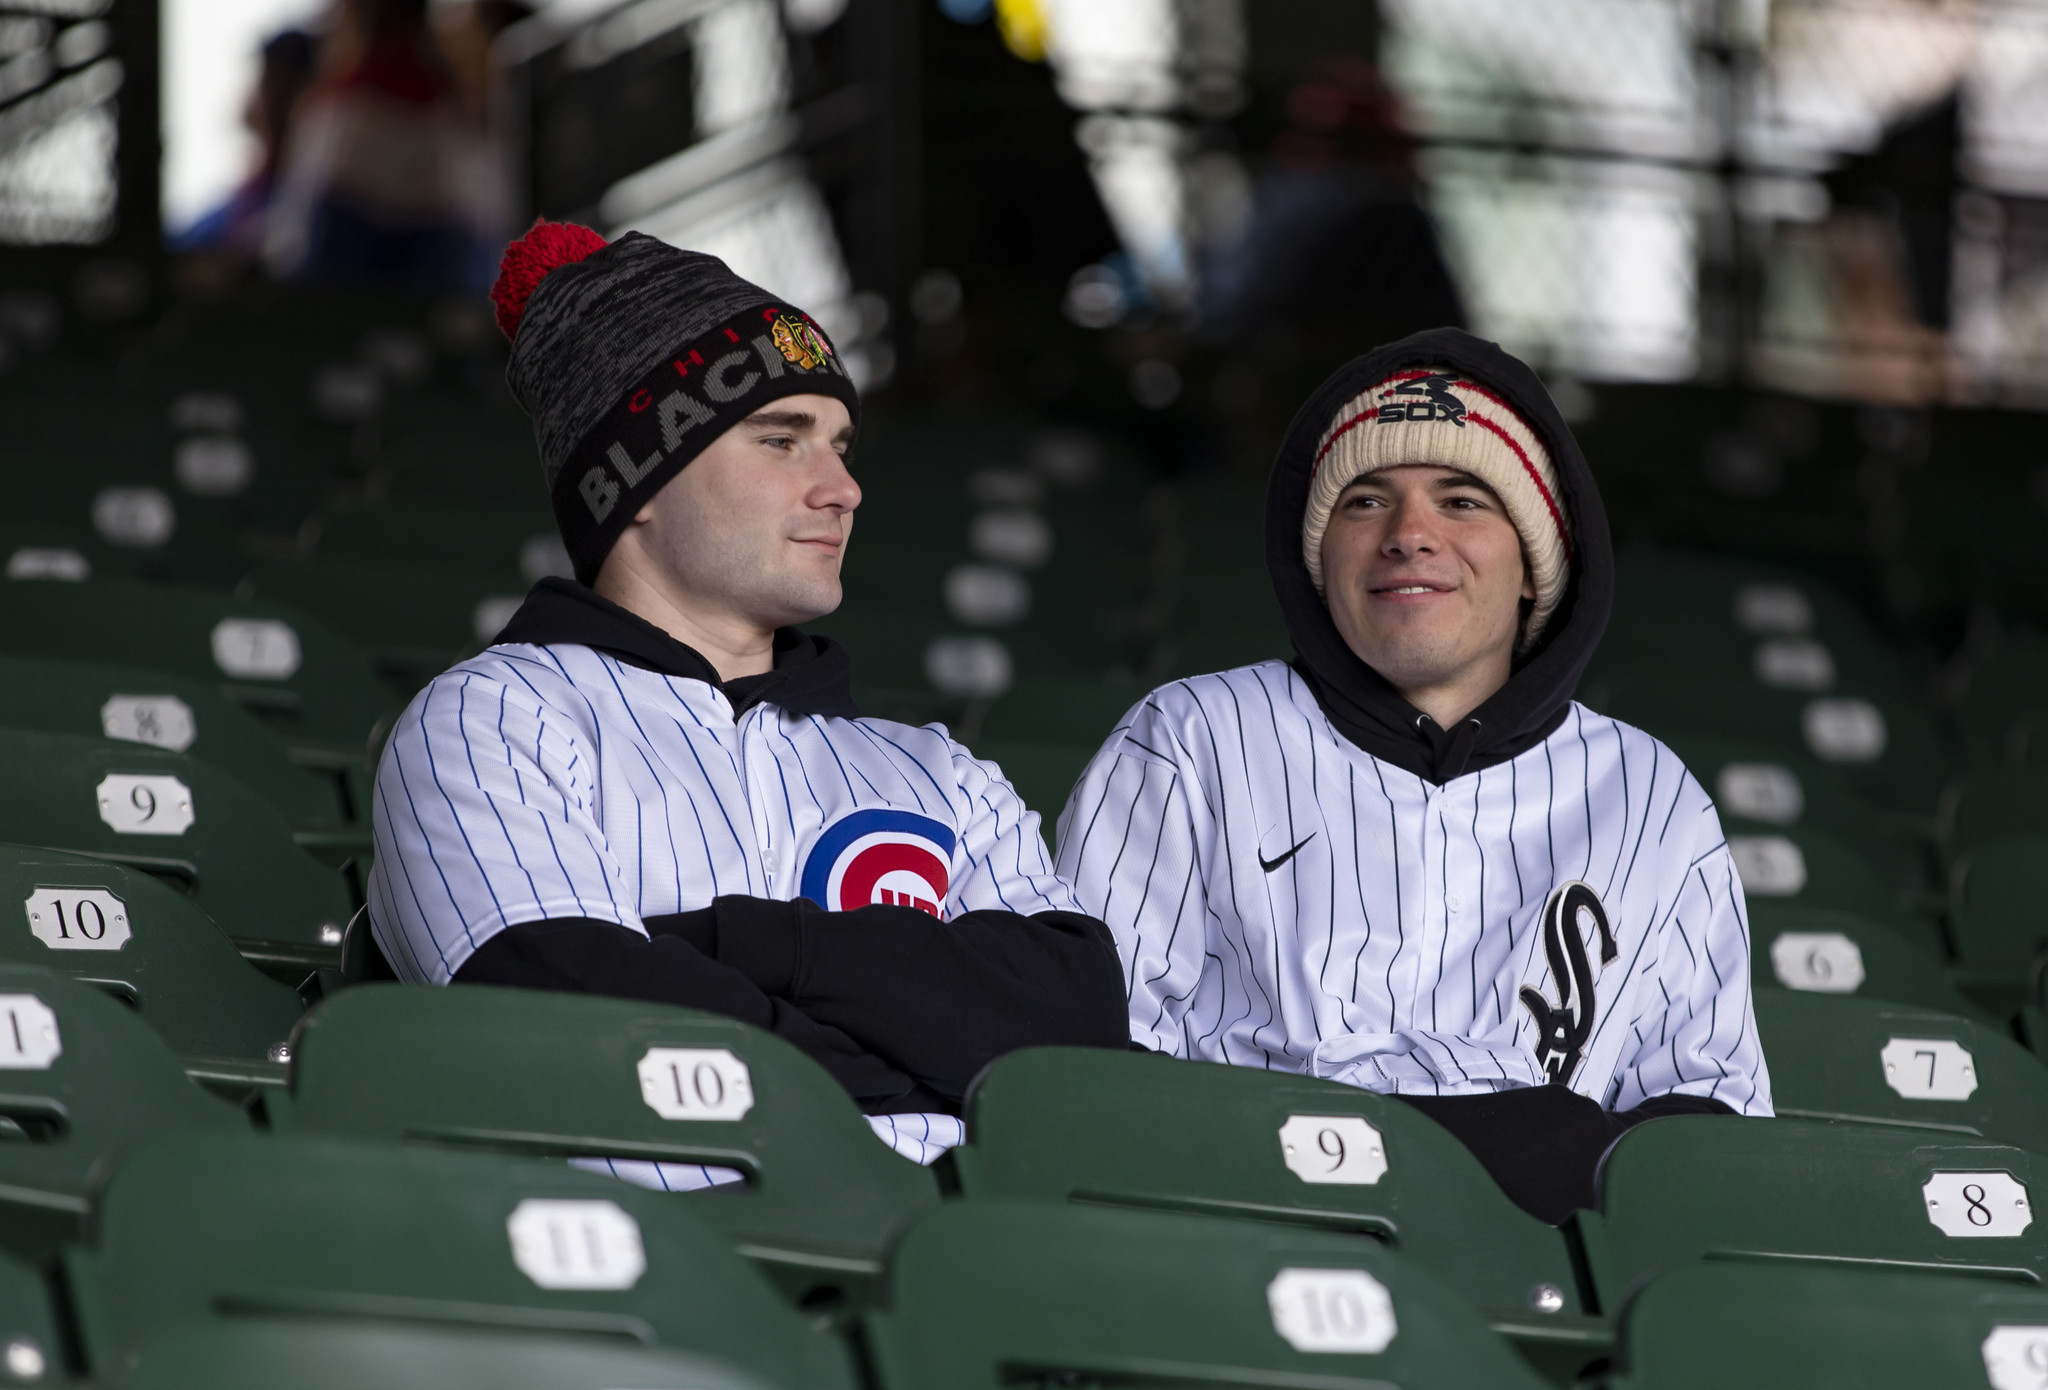 New Data Reports White Sox Fans are Smarter Than Cubs Fans